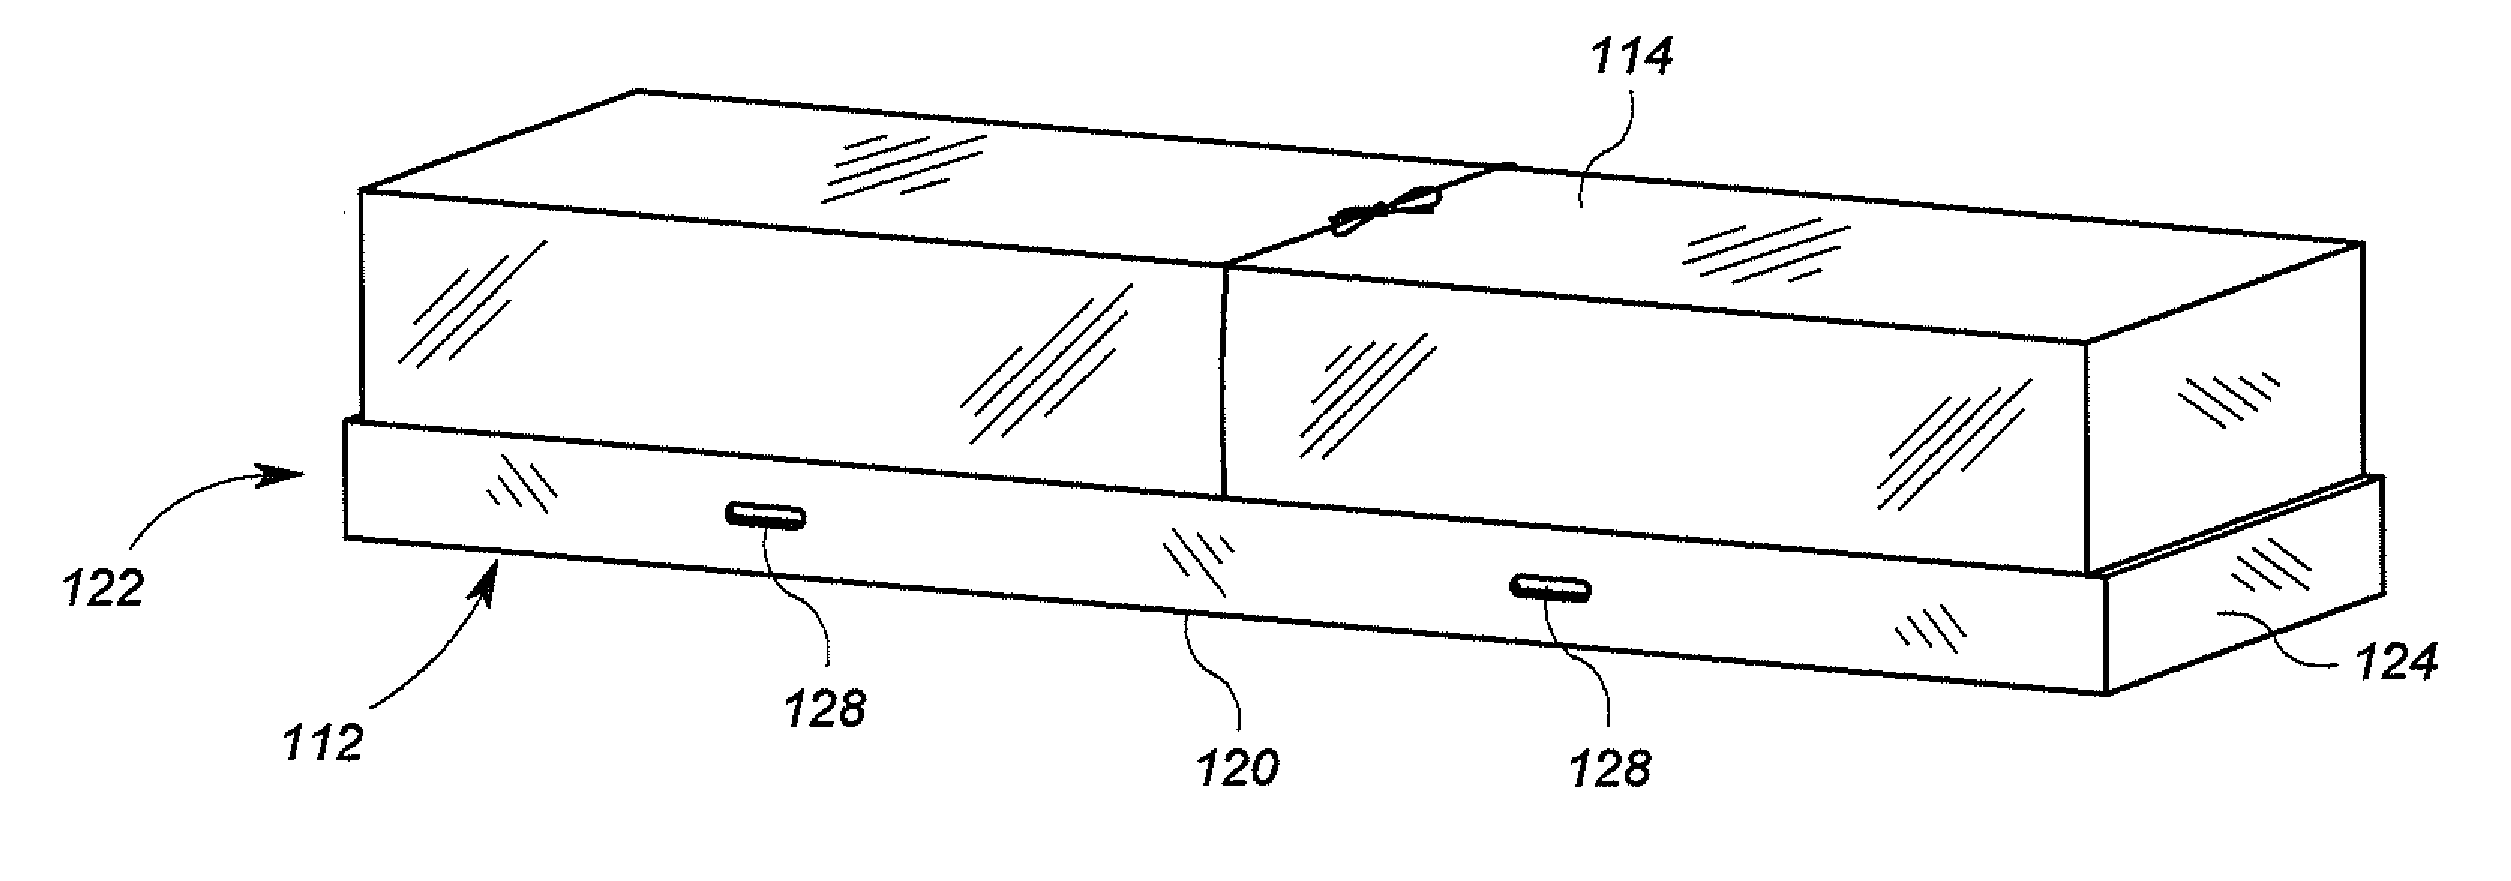 Lightweight Viewing Casket With Reinforcing Lid and Method of Using Same